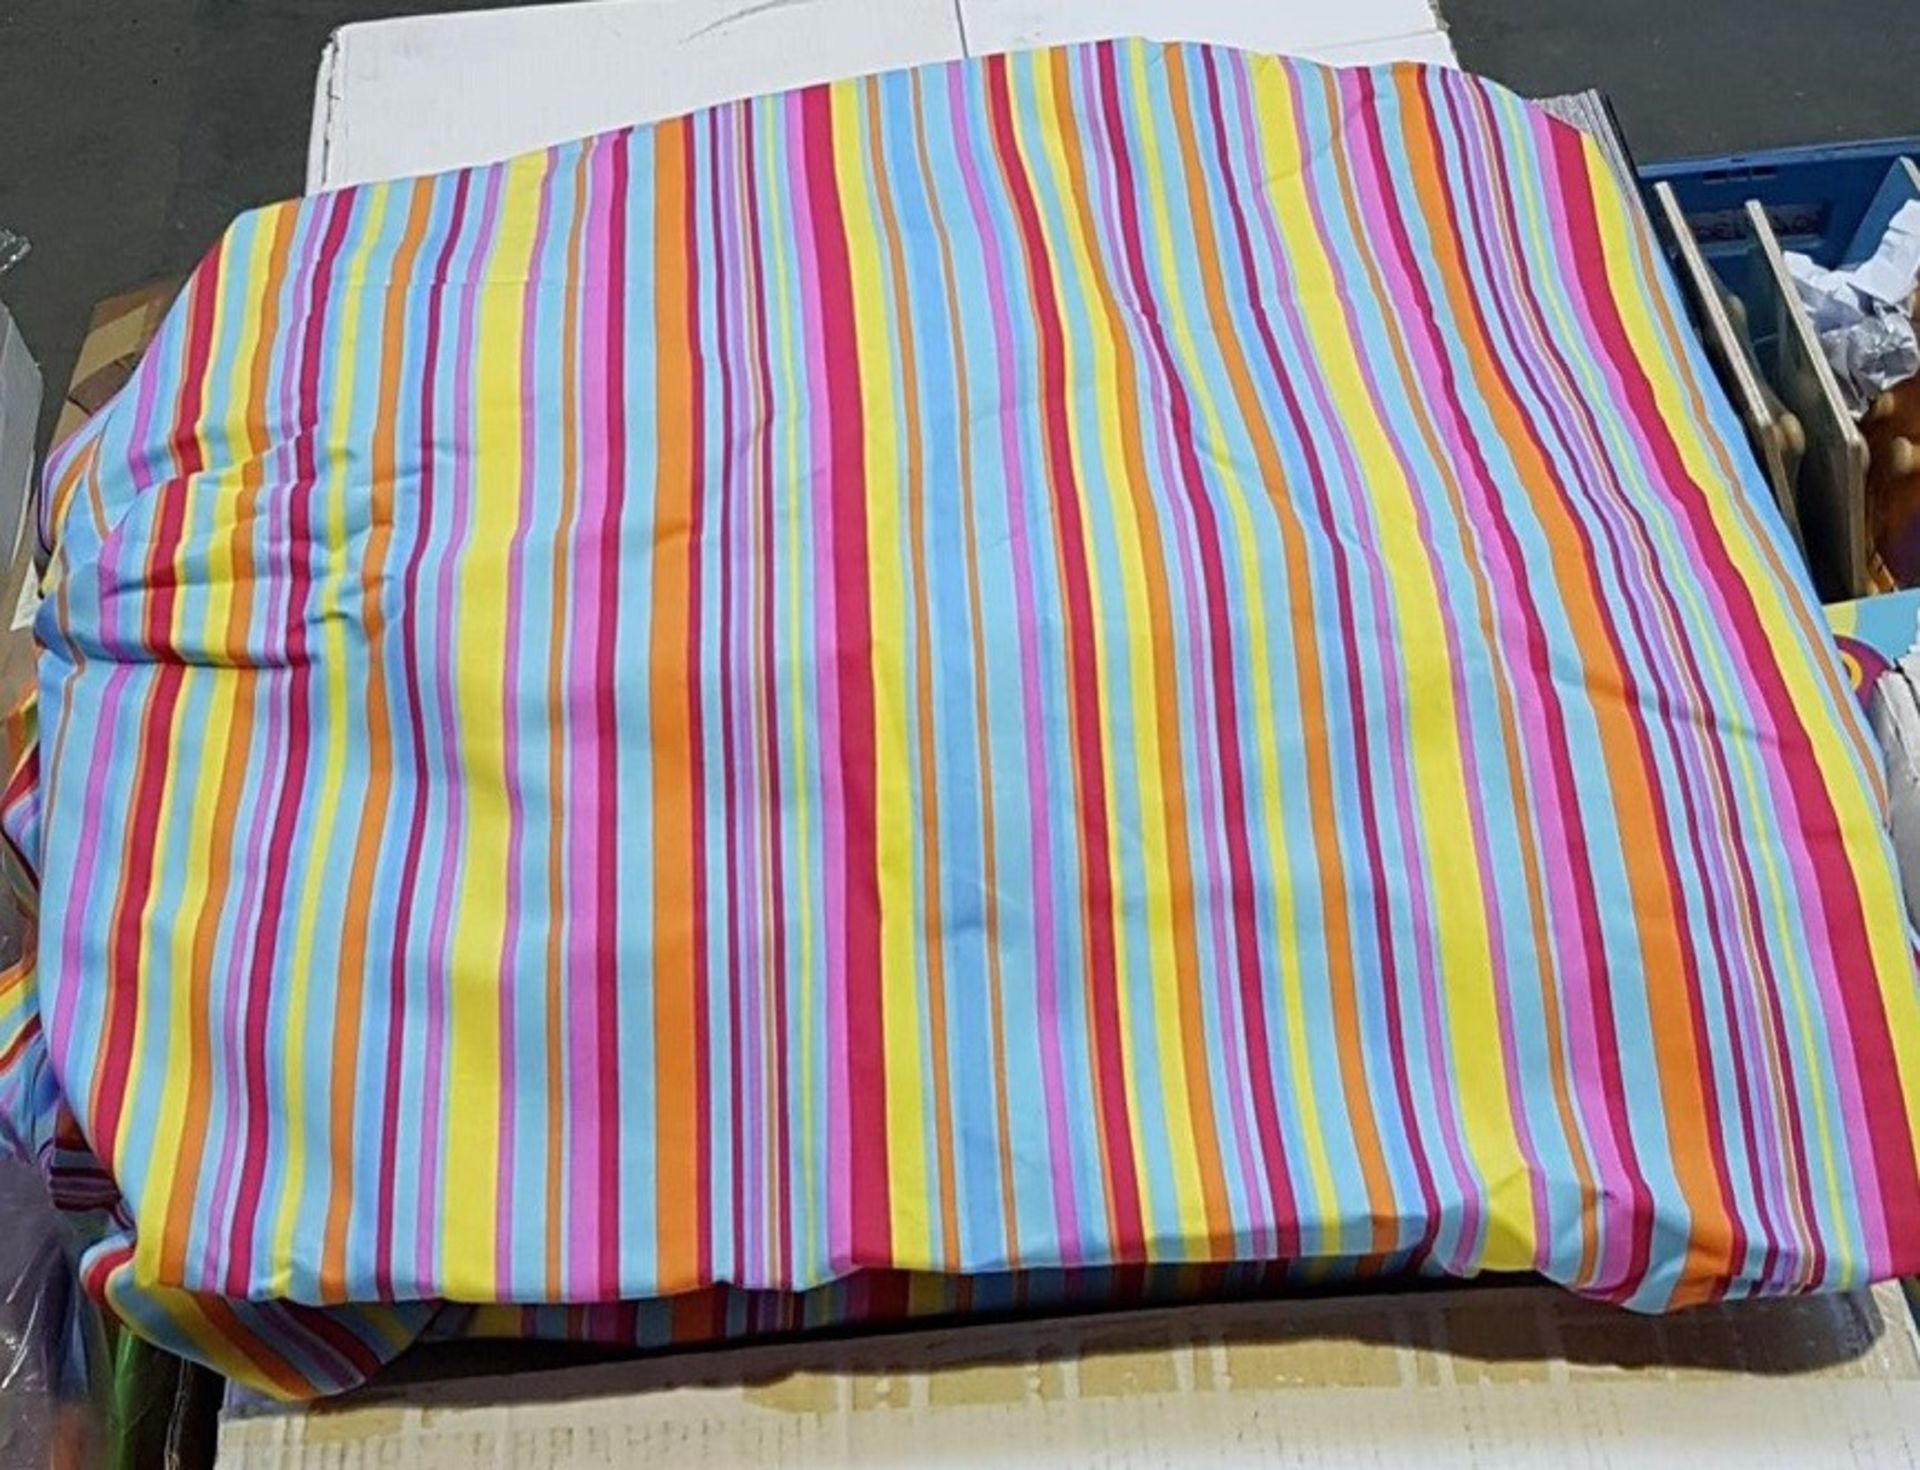 1 AS NEW BAGGED RAINBOW STRIPE GAZEBO COVER, RRP £72.00 (VIEWING HIGHLY RECOMMENDED)